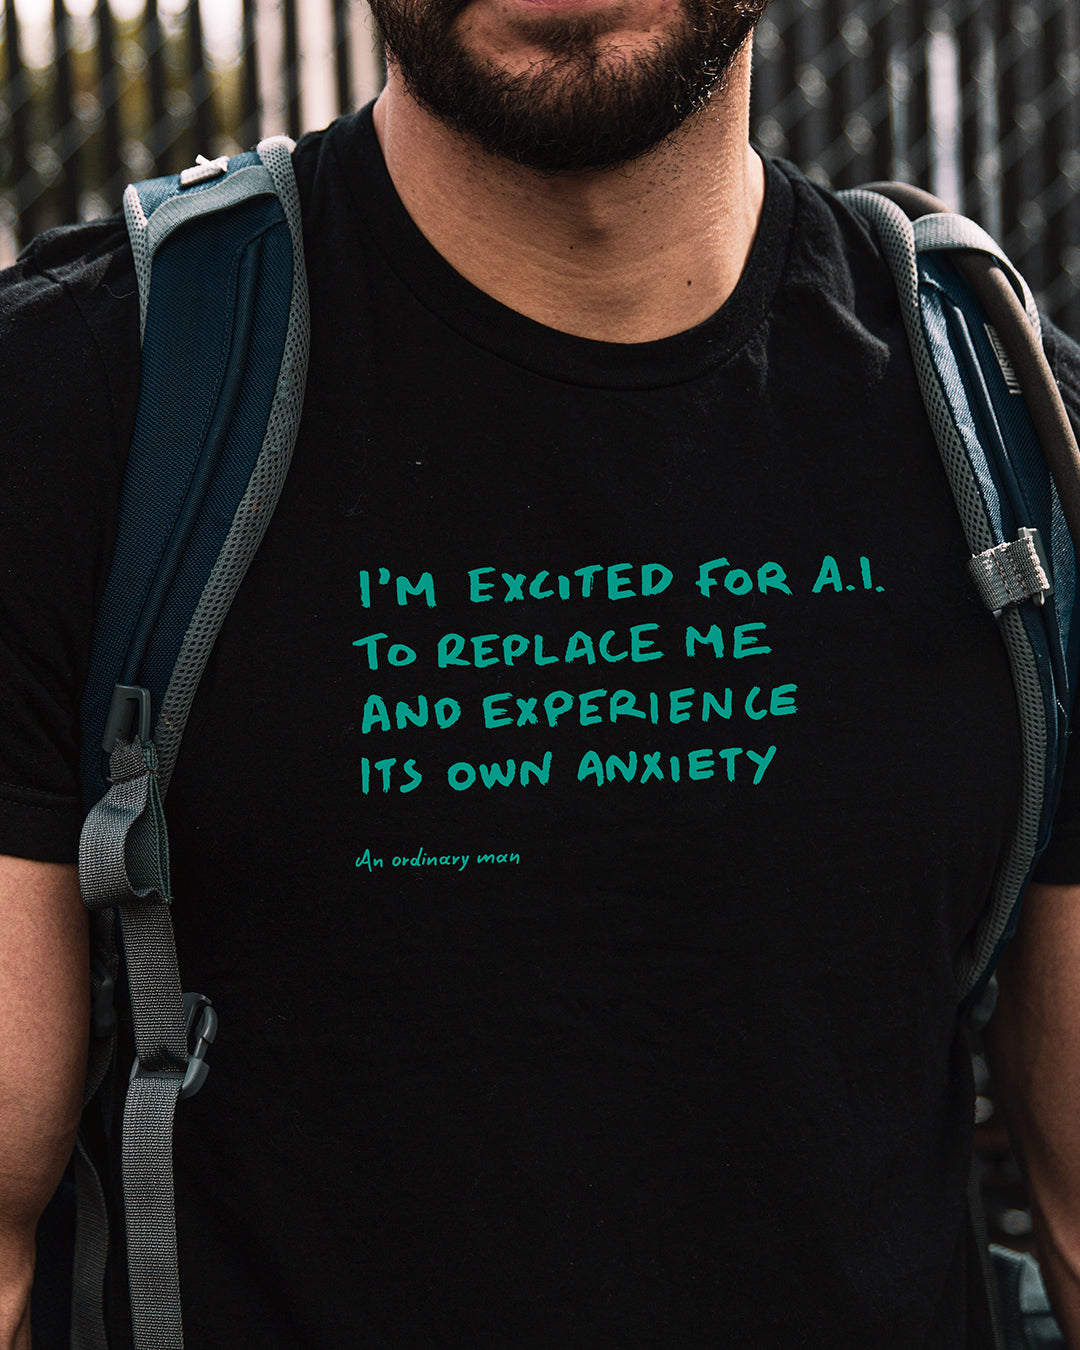 Unisex T-Shirt - I'm Excited For A.I. To Replace Me And Experience Its Own Anxiety